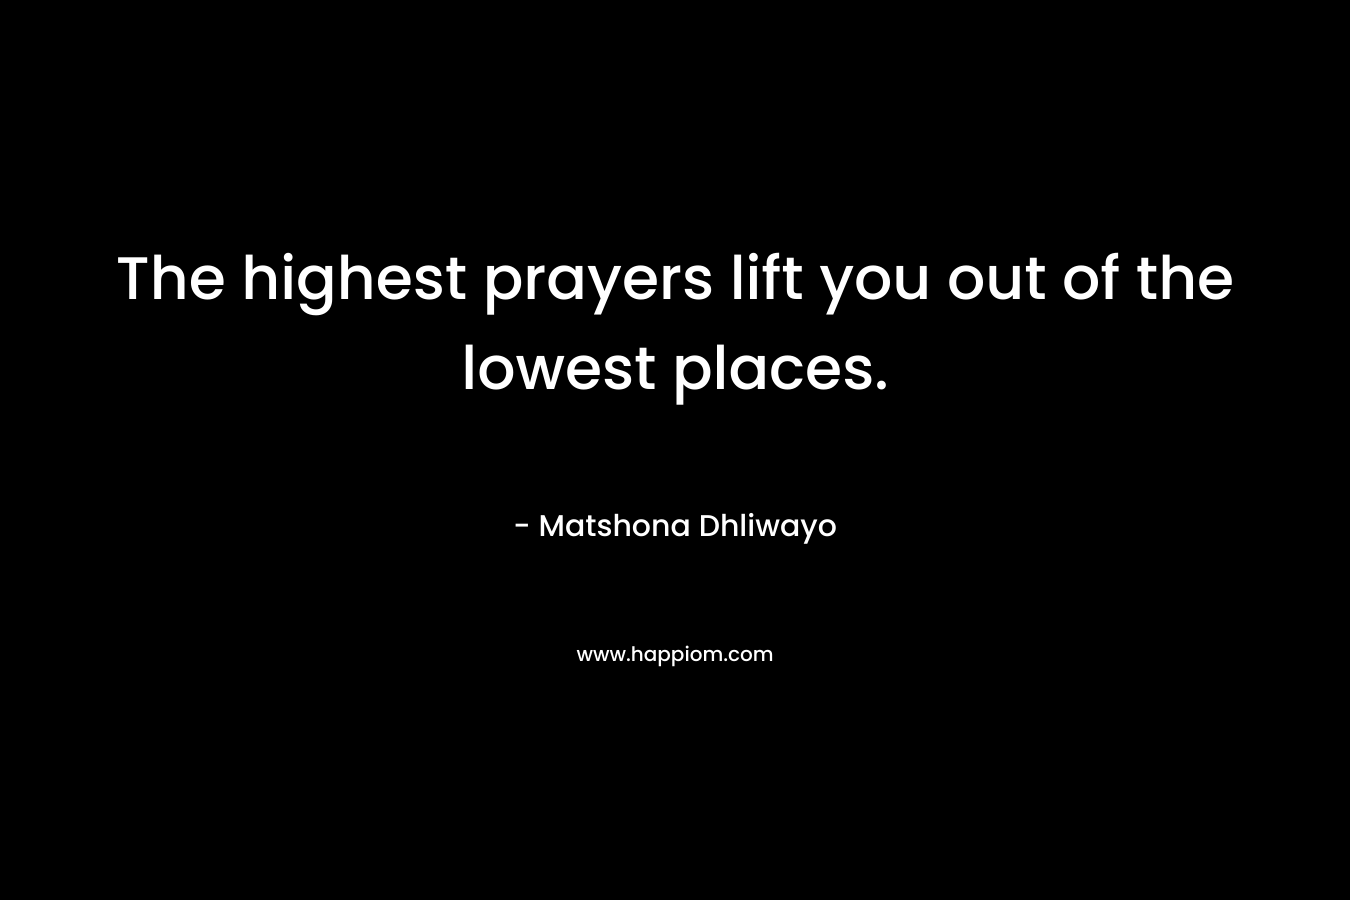 The highest prayers lift you out of the lowest places.